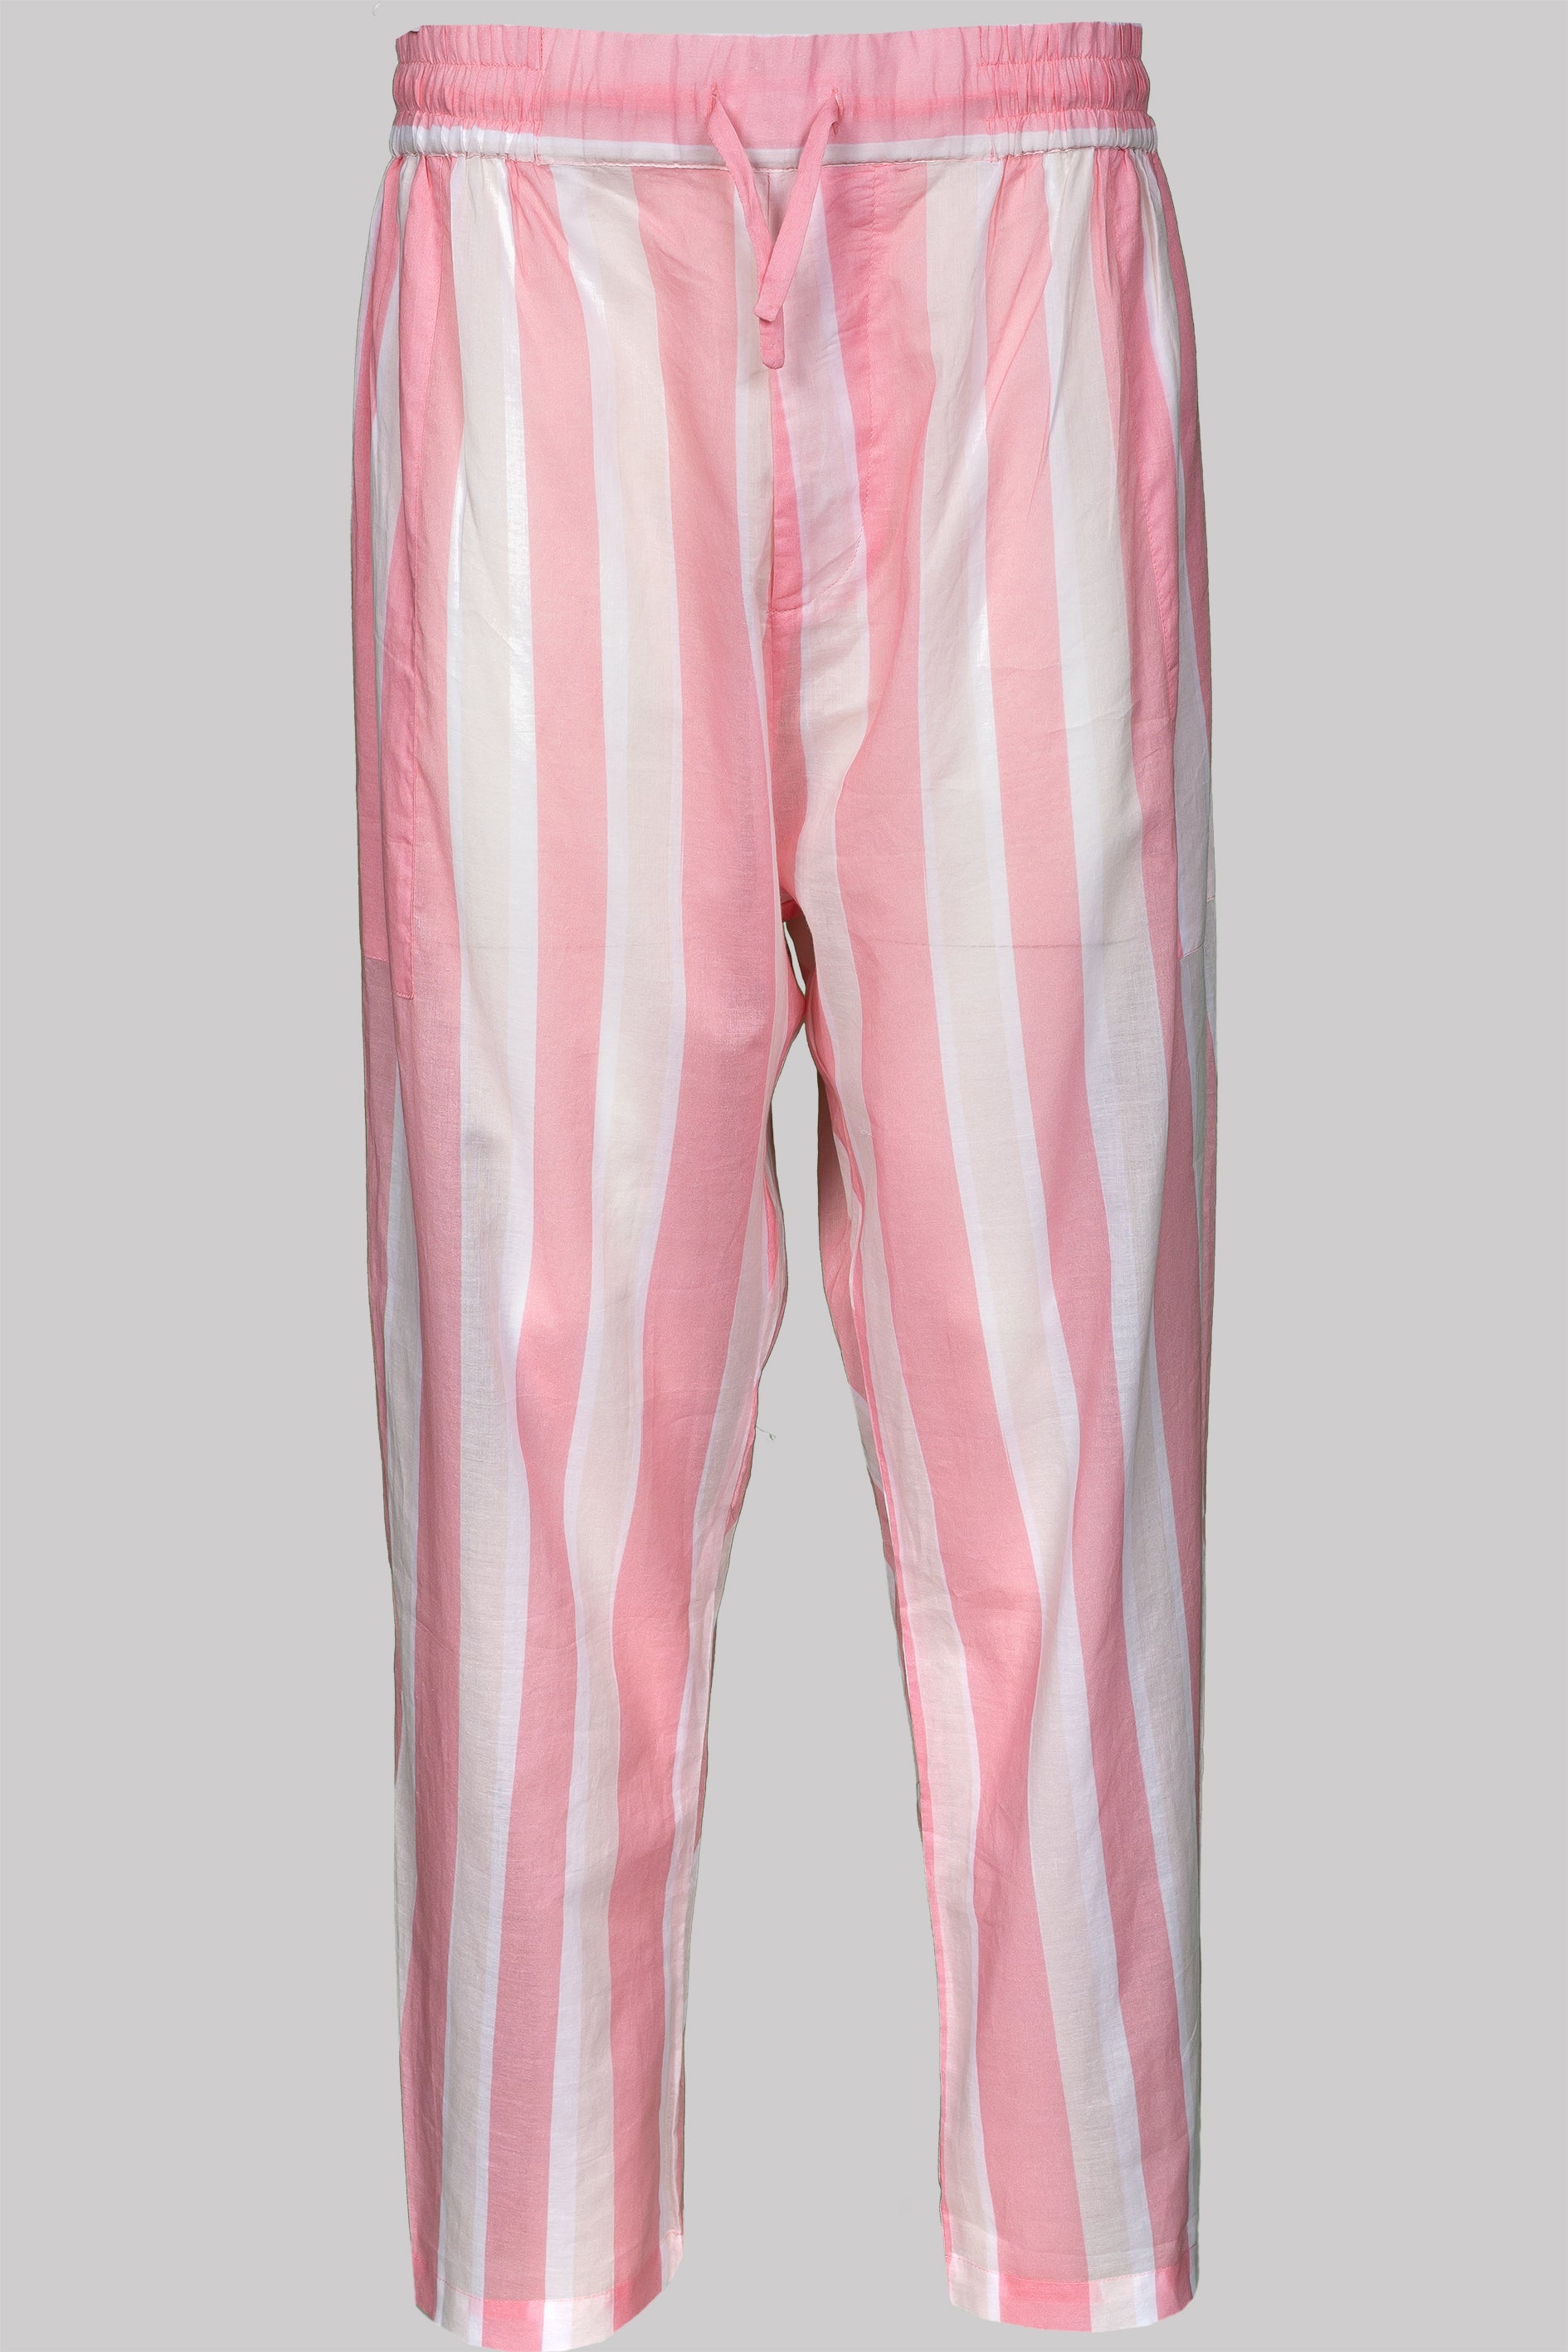 9053_FLOWY-TROUSERS_PINK-White